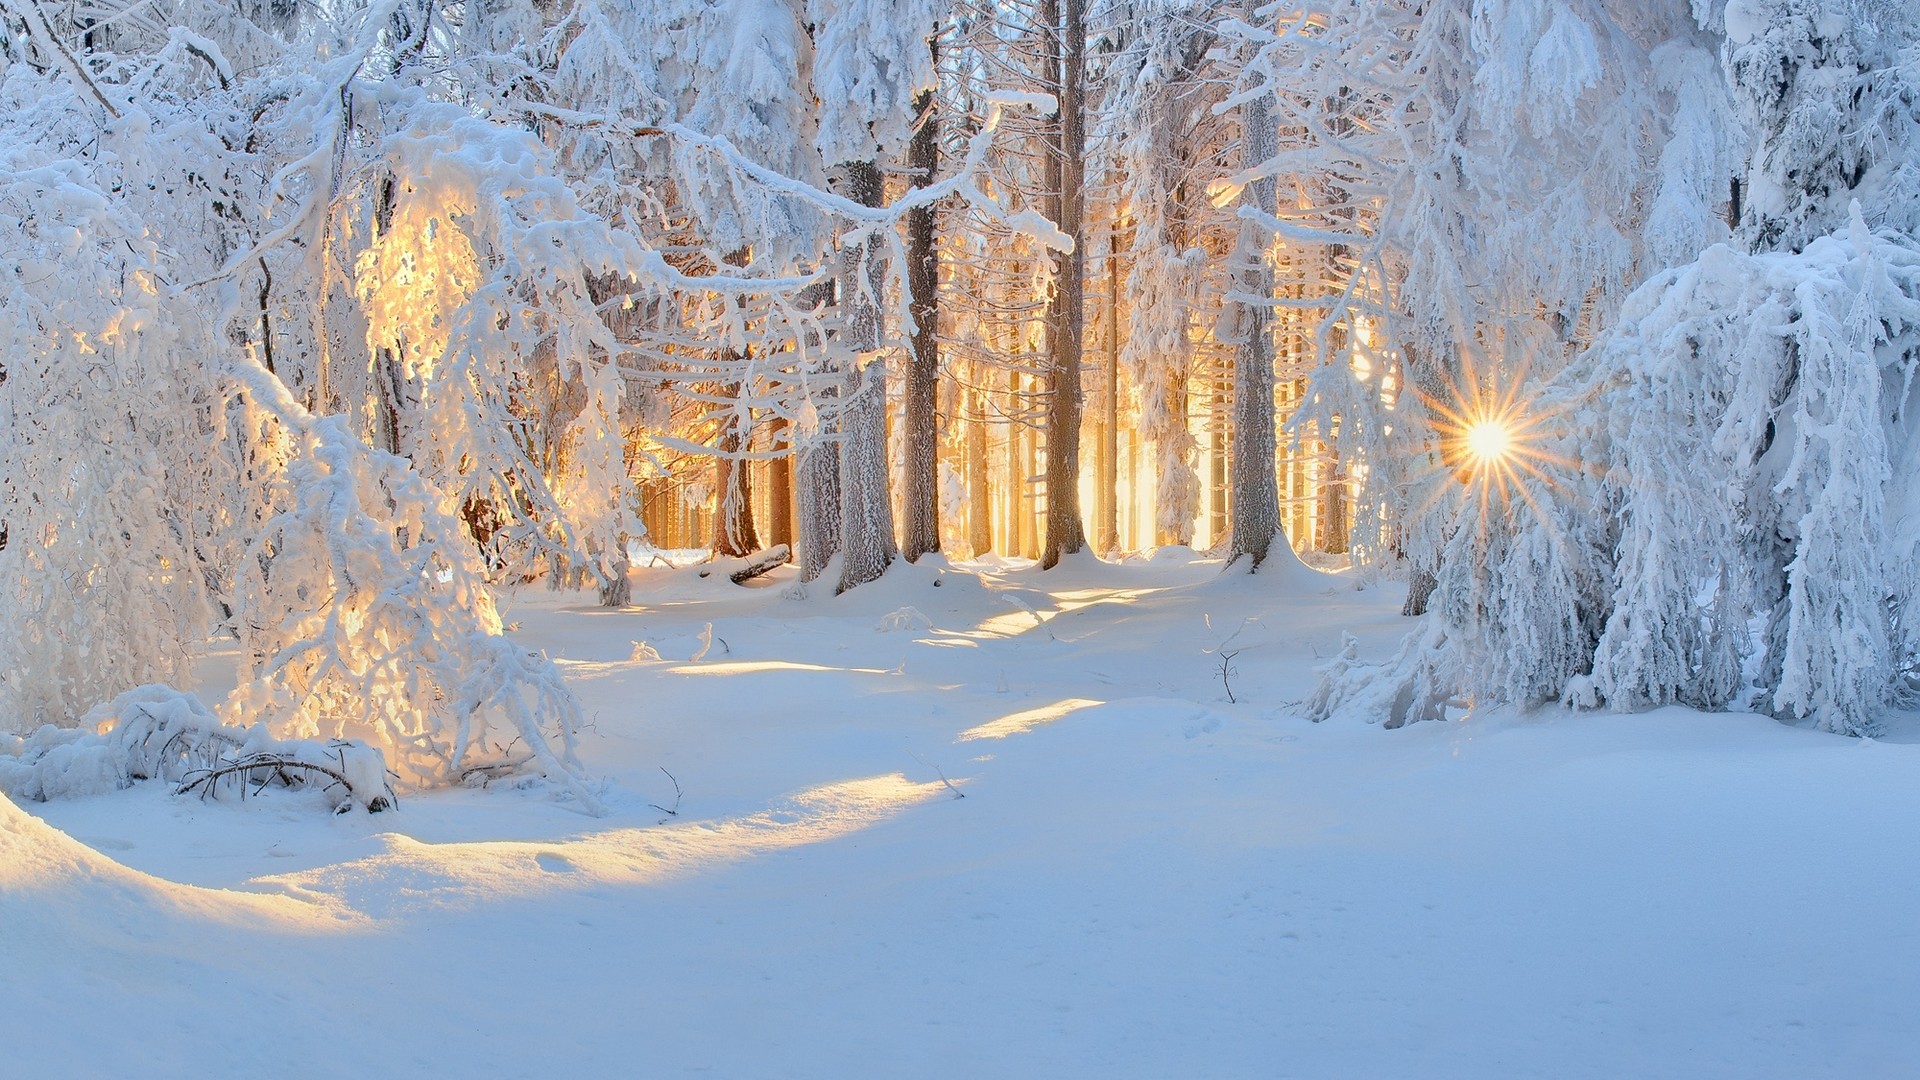 General 1920x1080 winter nature forest snow trees sun rays white cold sunlight frost outdoors